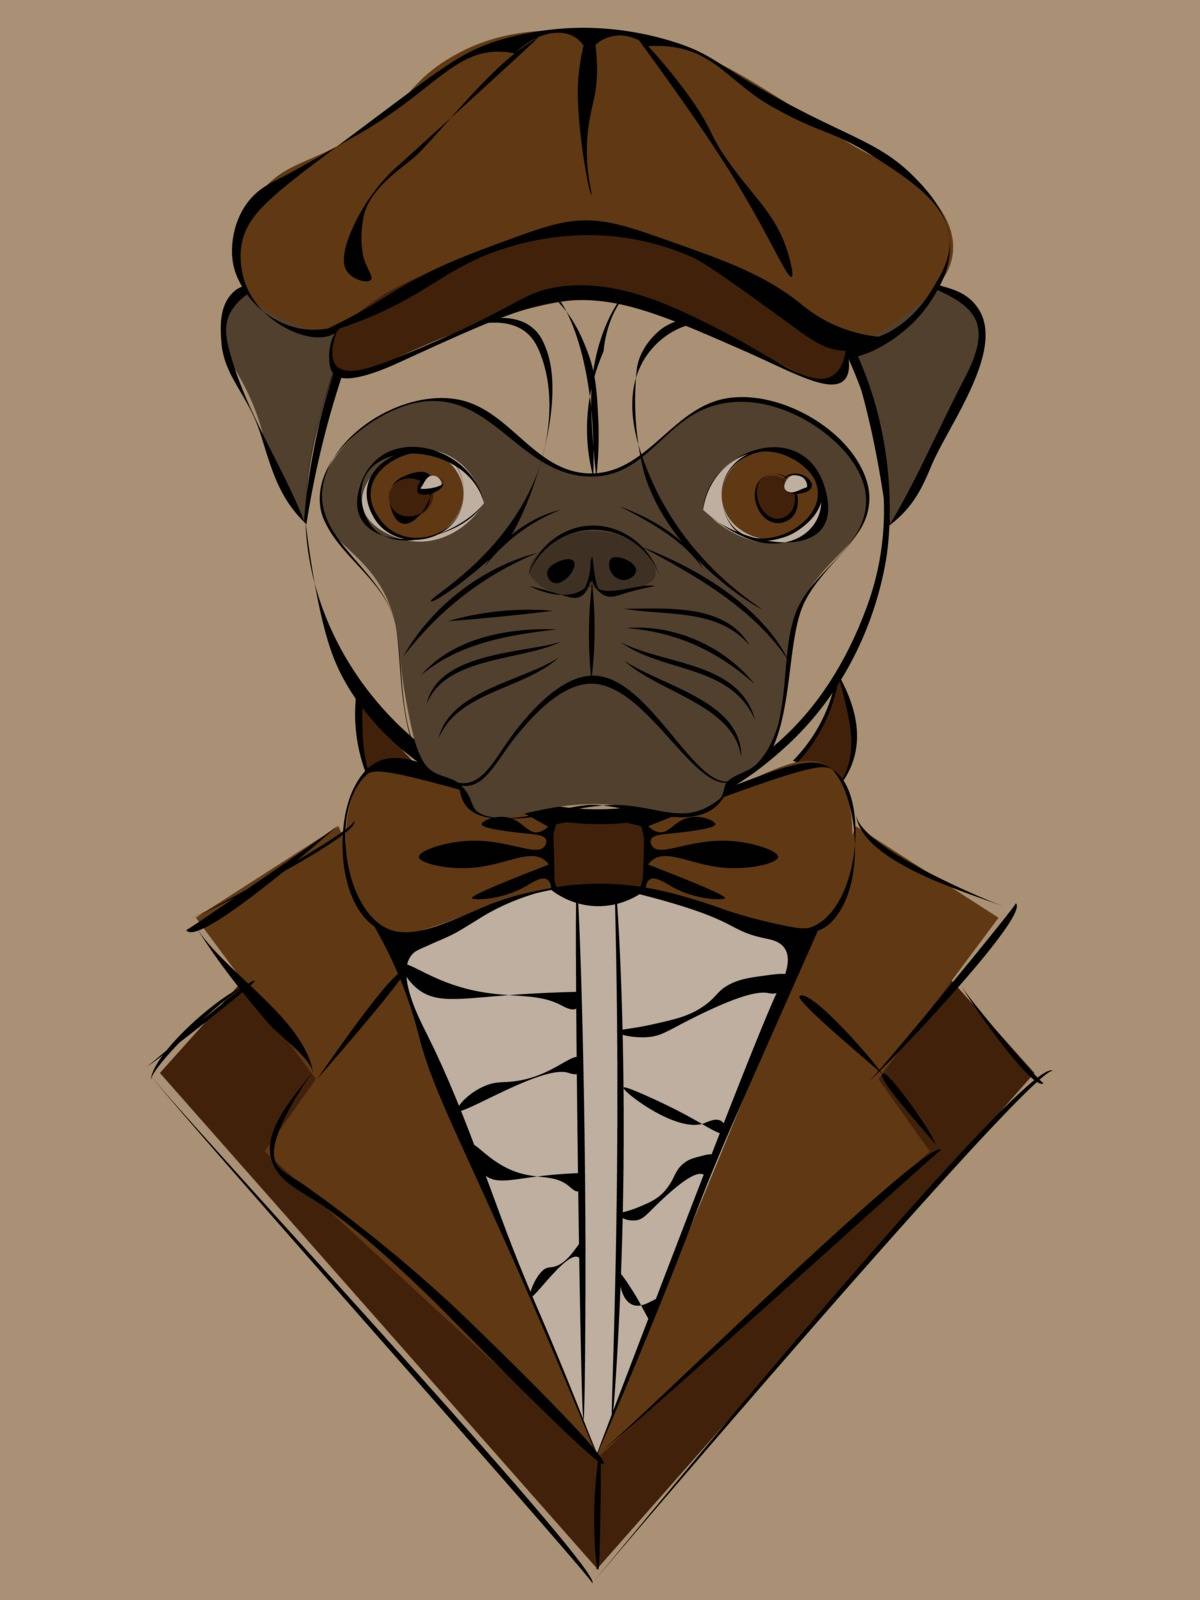 cute illustrasion with pug in old-fashioned brown cap and jacket on beige backgrond